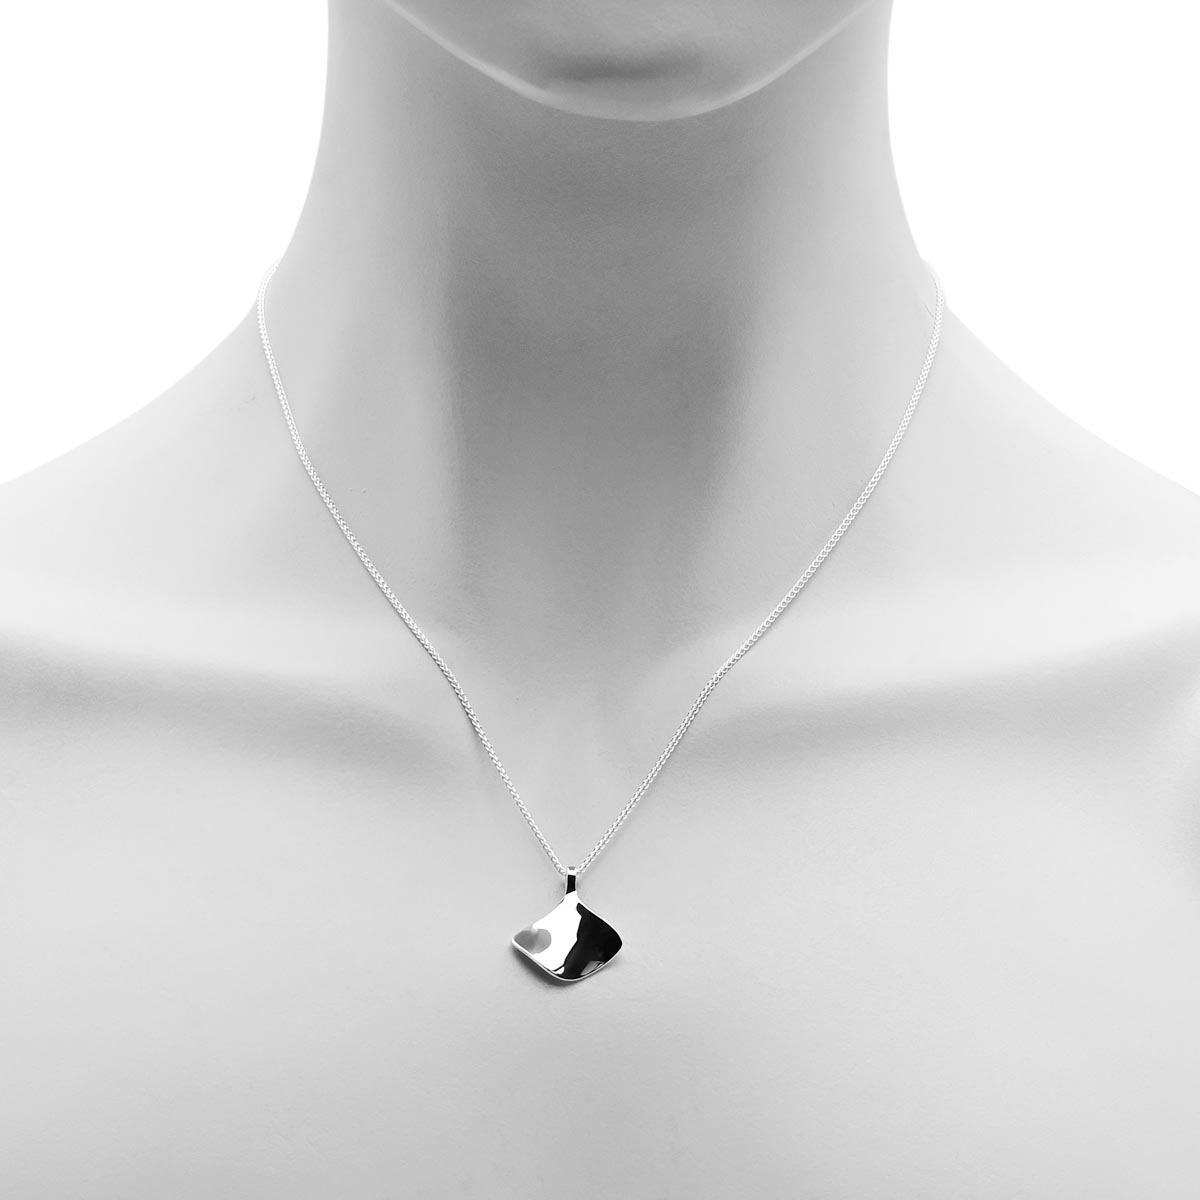 E.L. Designs Reflection Necklace in Sterling Silver